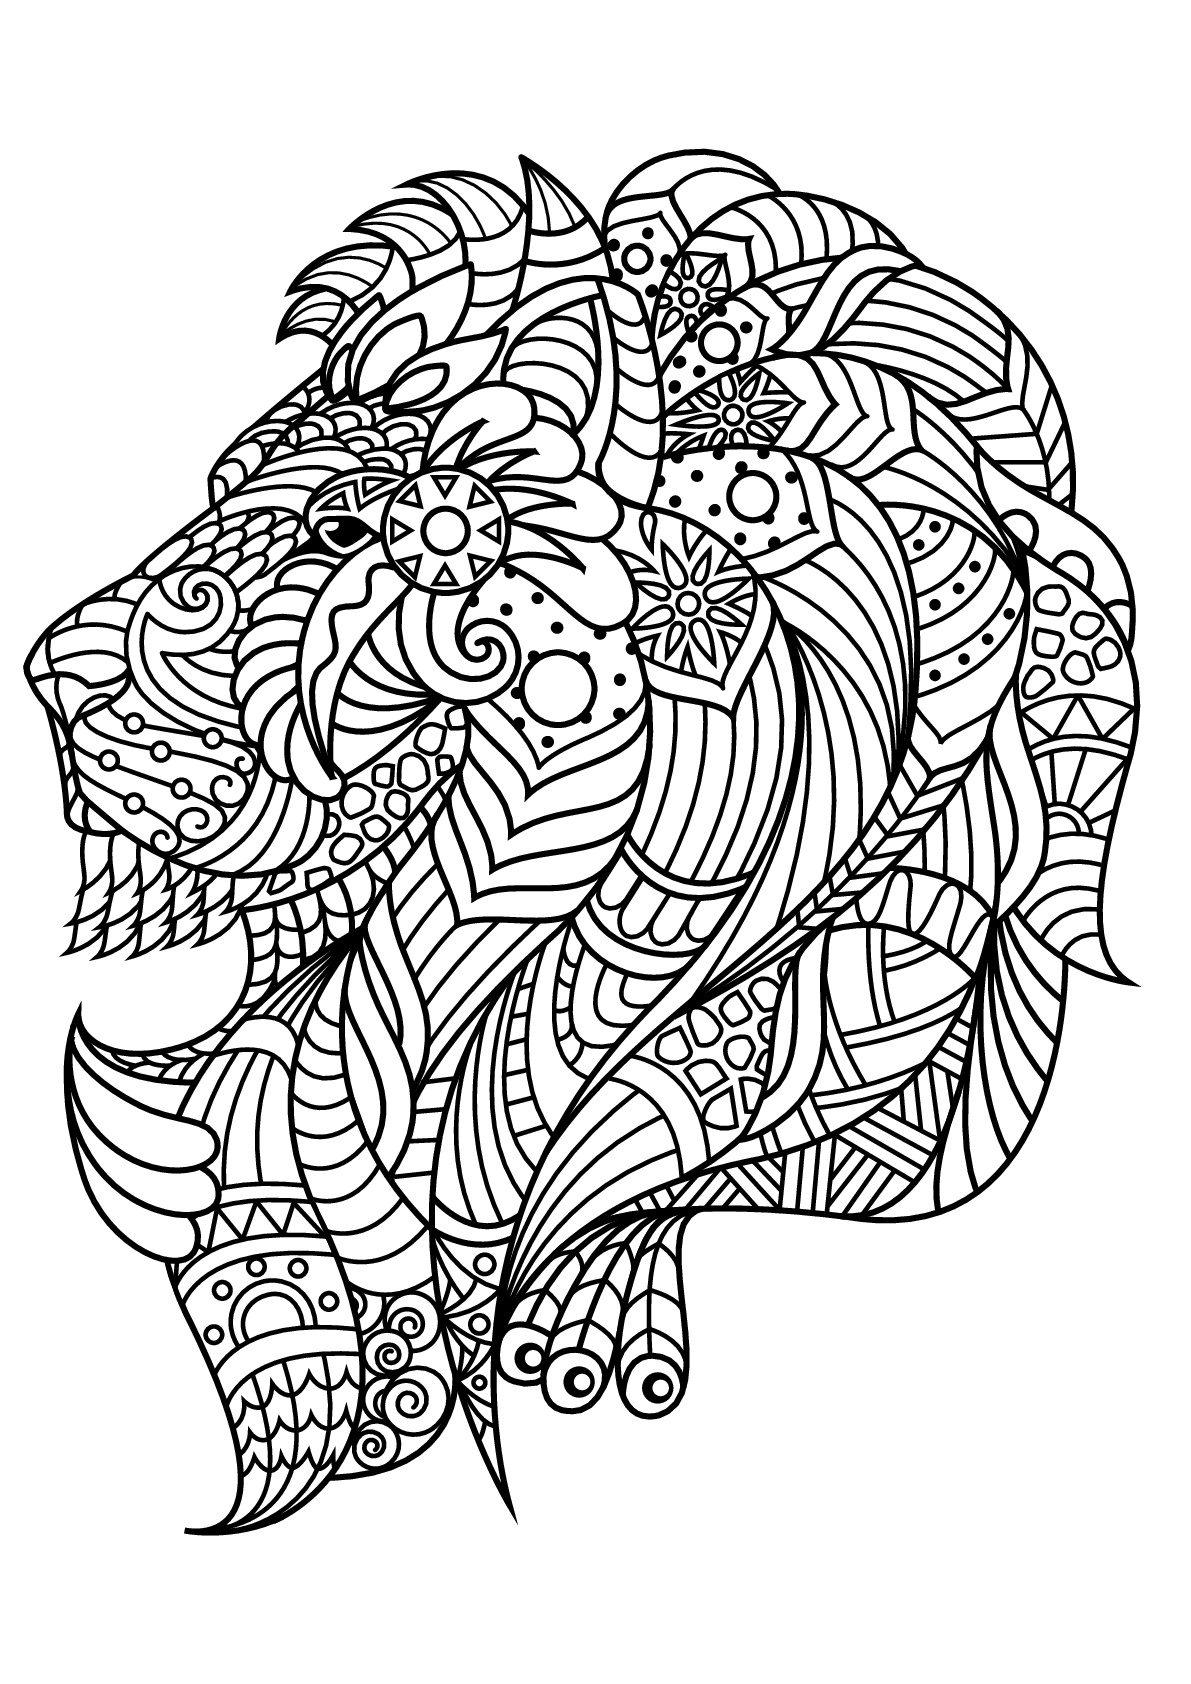 Free book lion - Lions Adult Coloring Pages